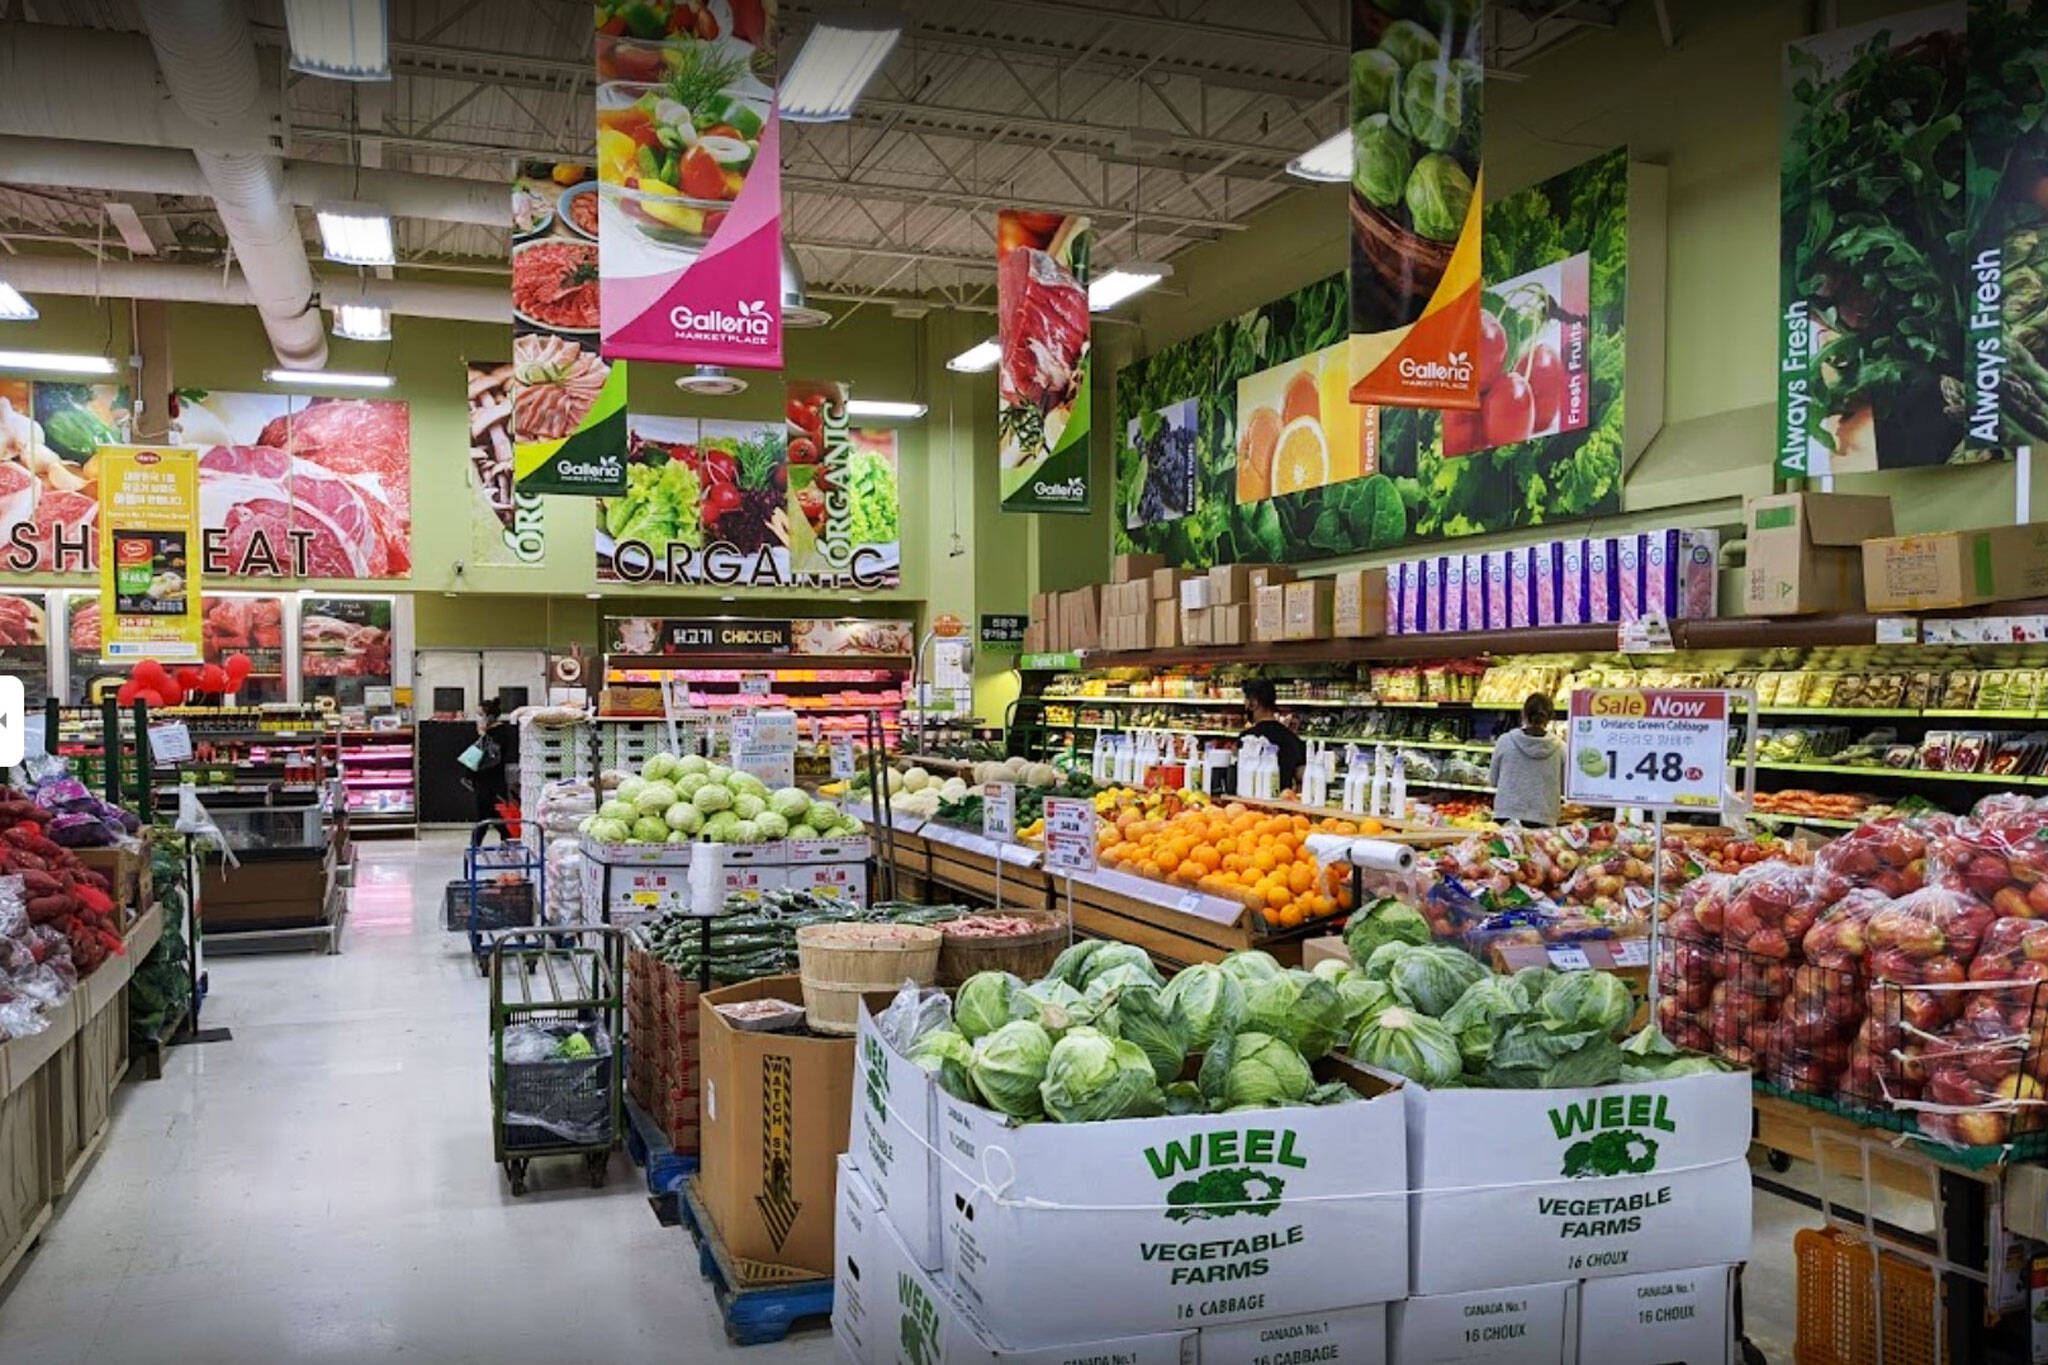 https://media.blogto.com/articles/20211129-24-hour-grocery-store-toronto.jpg?w=2048&cmd=resize_then_crop&height=1365&quality=70